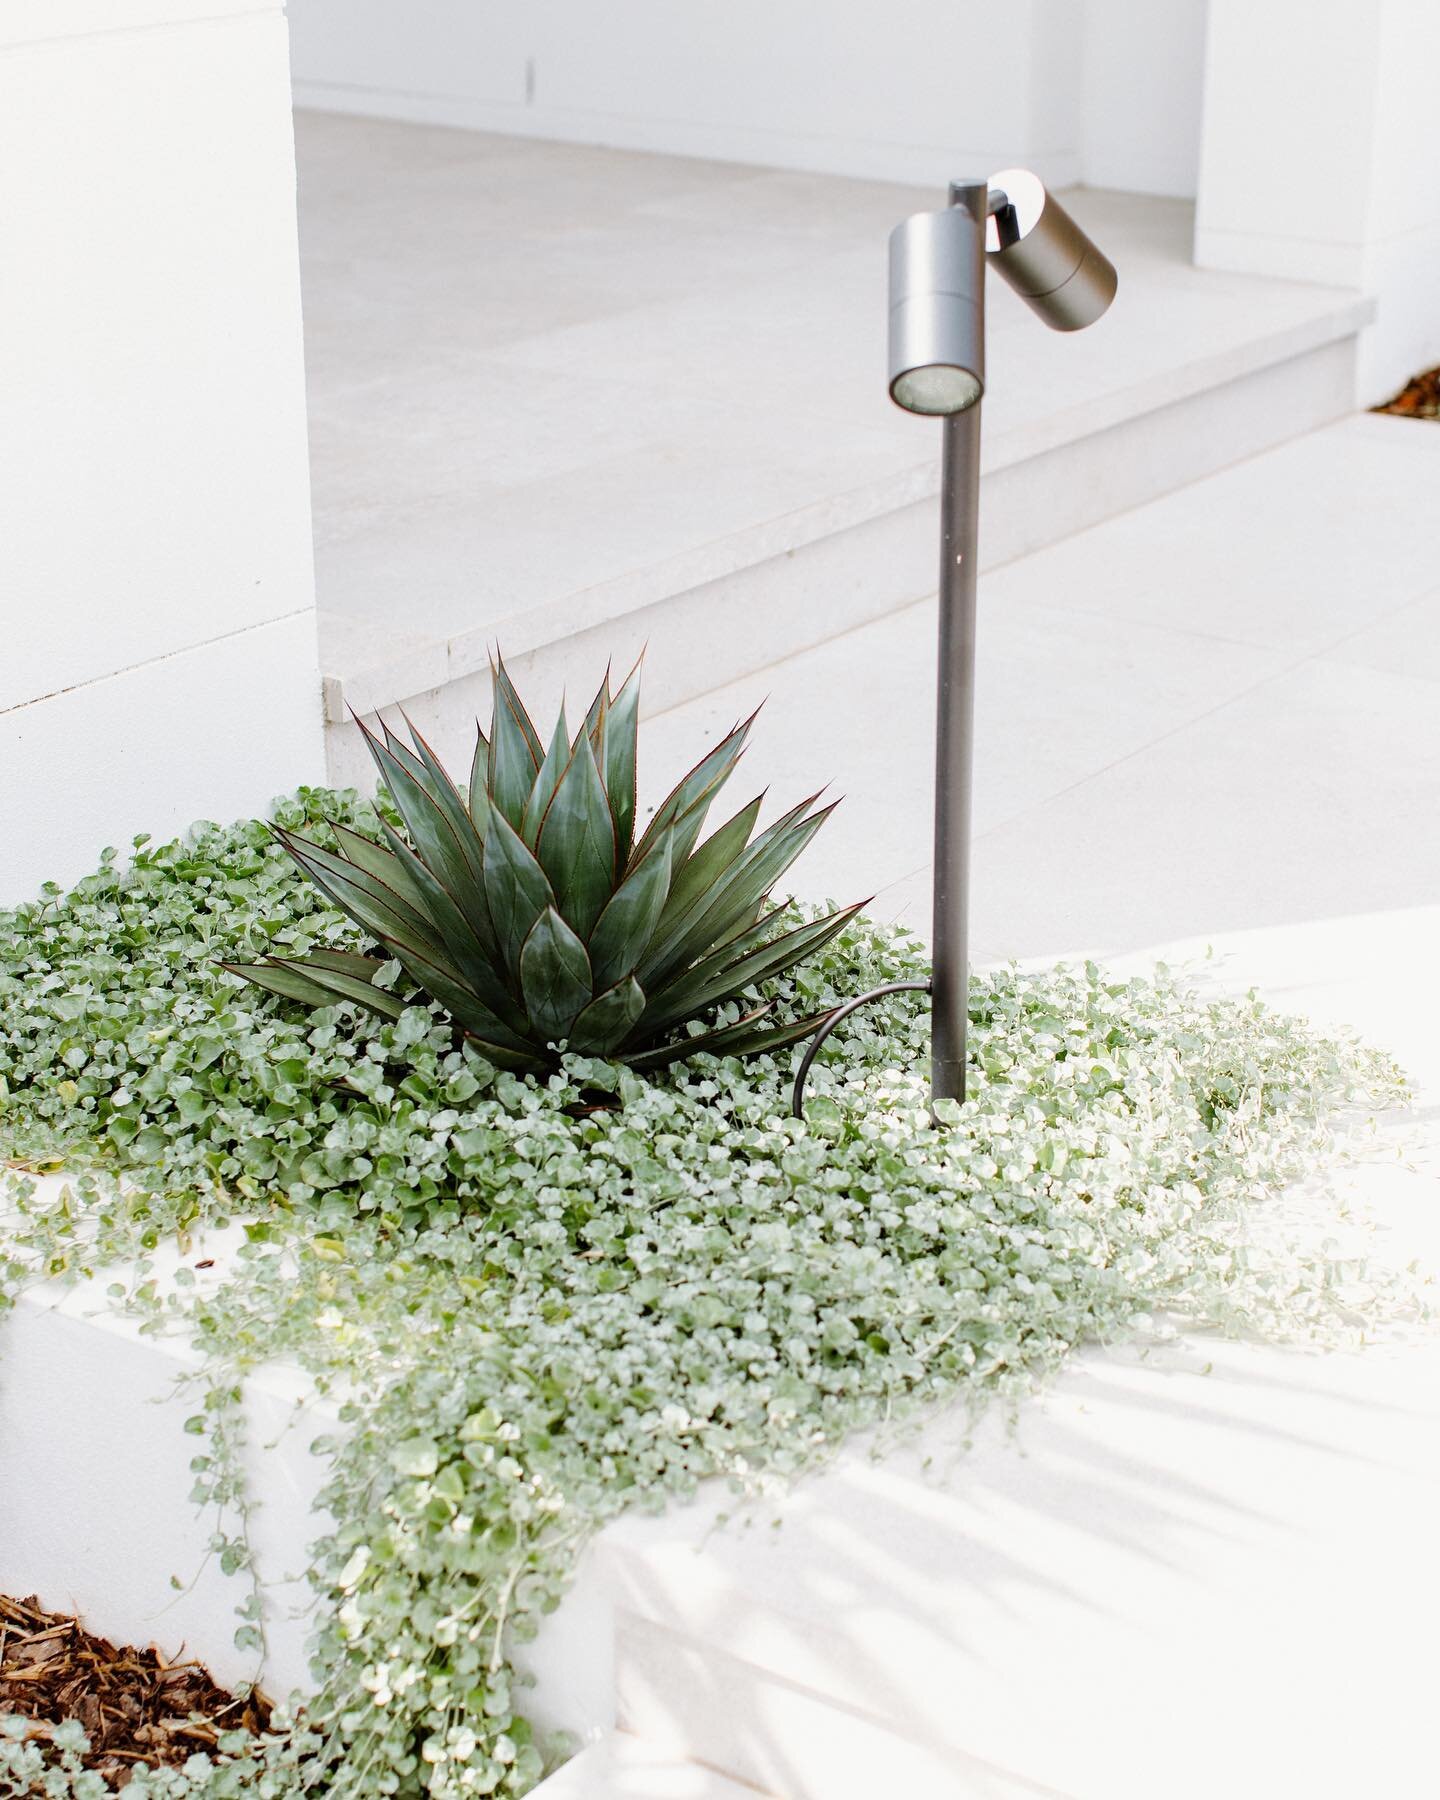 A mini statement to a front entry pocket. Agave blue glow and dichondra silver falls. #createyourescape